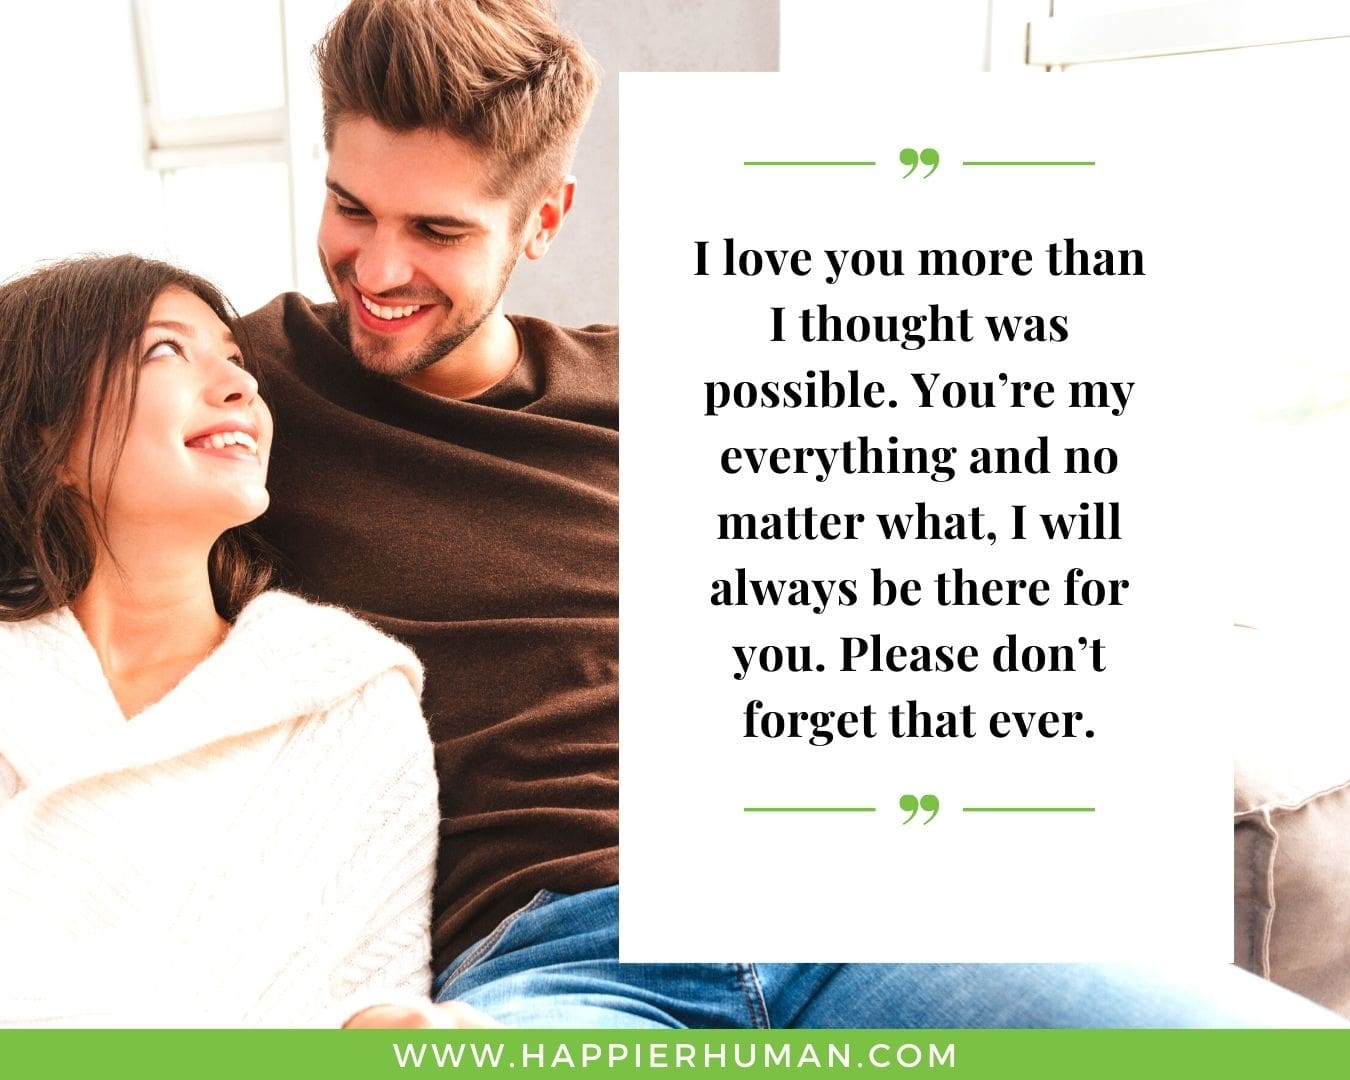 I’m Here for You Quotes - “I love you more than I thought was possible. You’re my everything and no matter what, I will always be there for you. Please don’t forget that ever.”